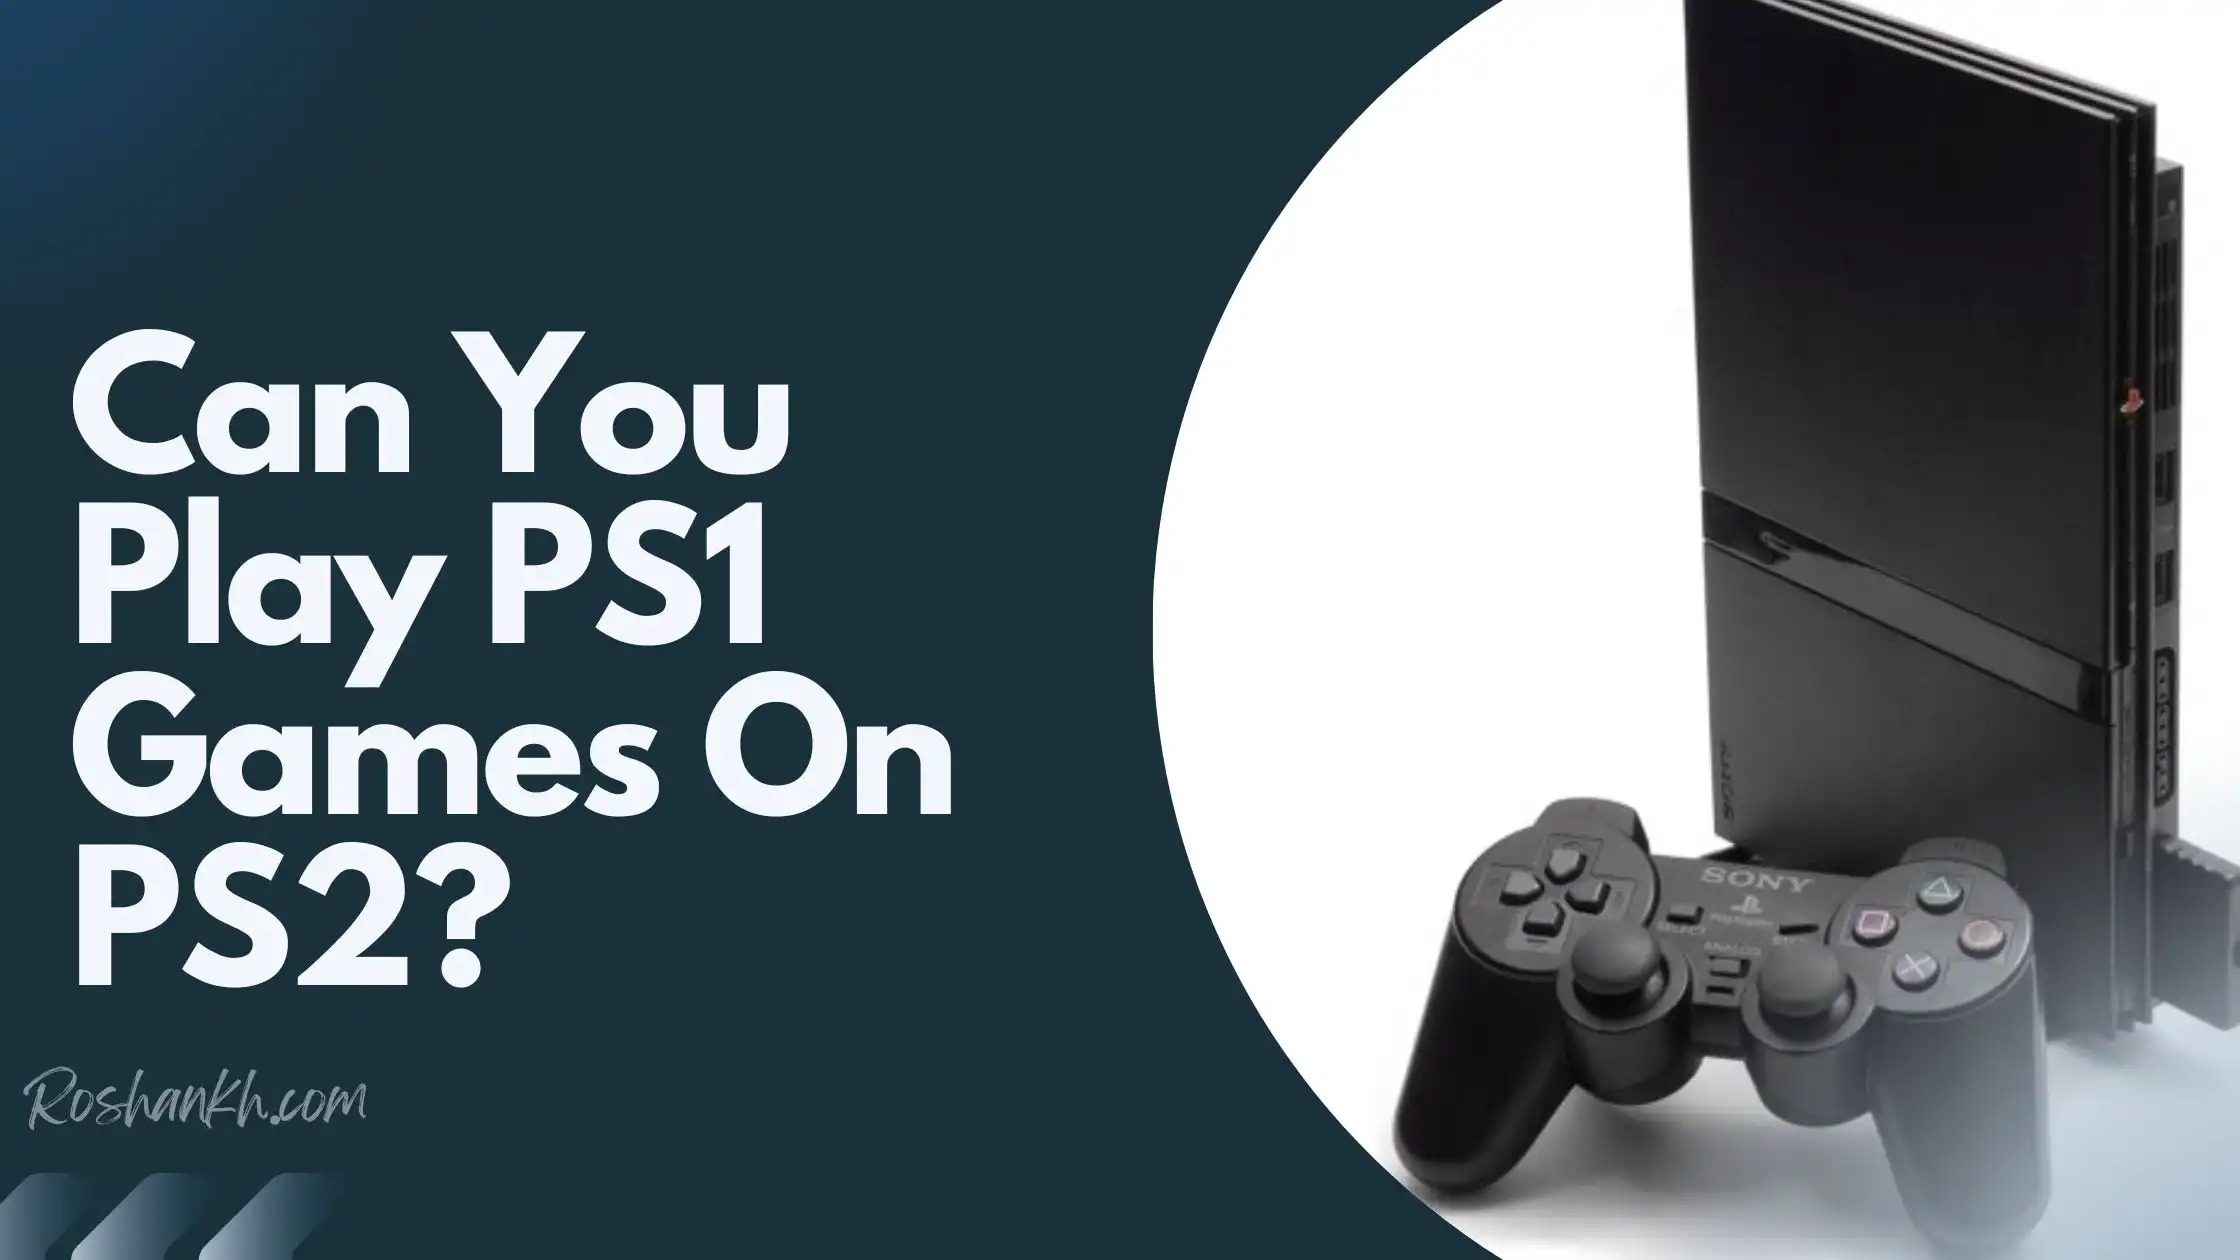 Can You Play Ps1 Games On Ps2?